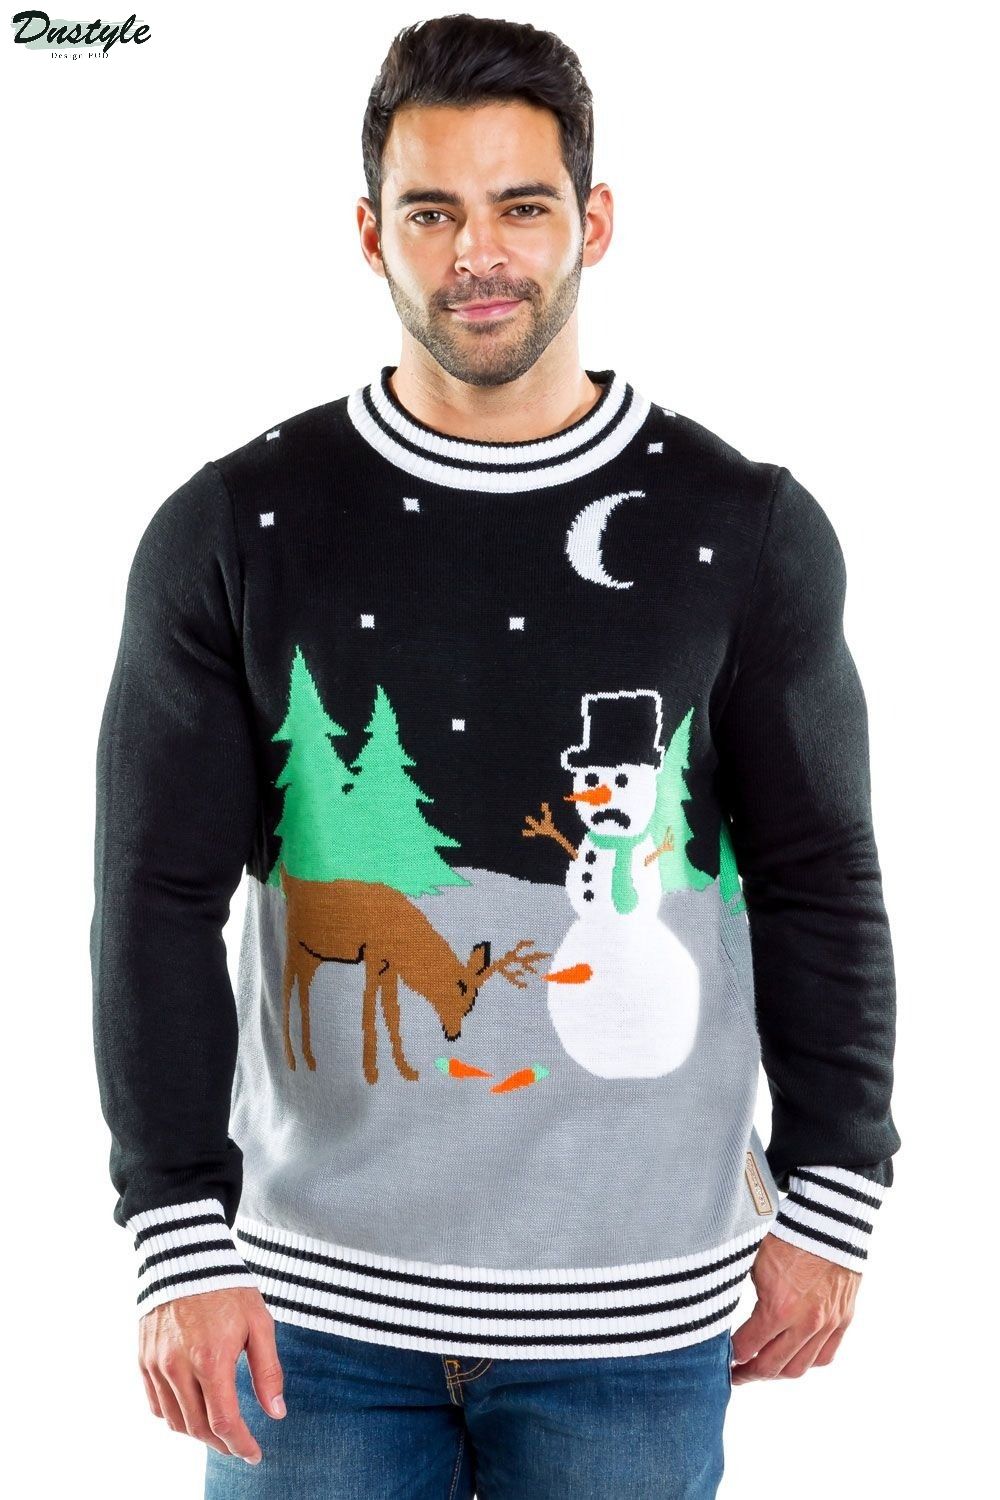 Carrot trail snowman nightmare ugly christmas sweater 2